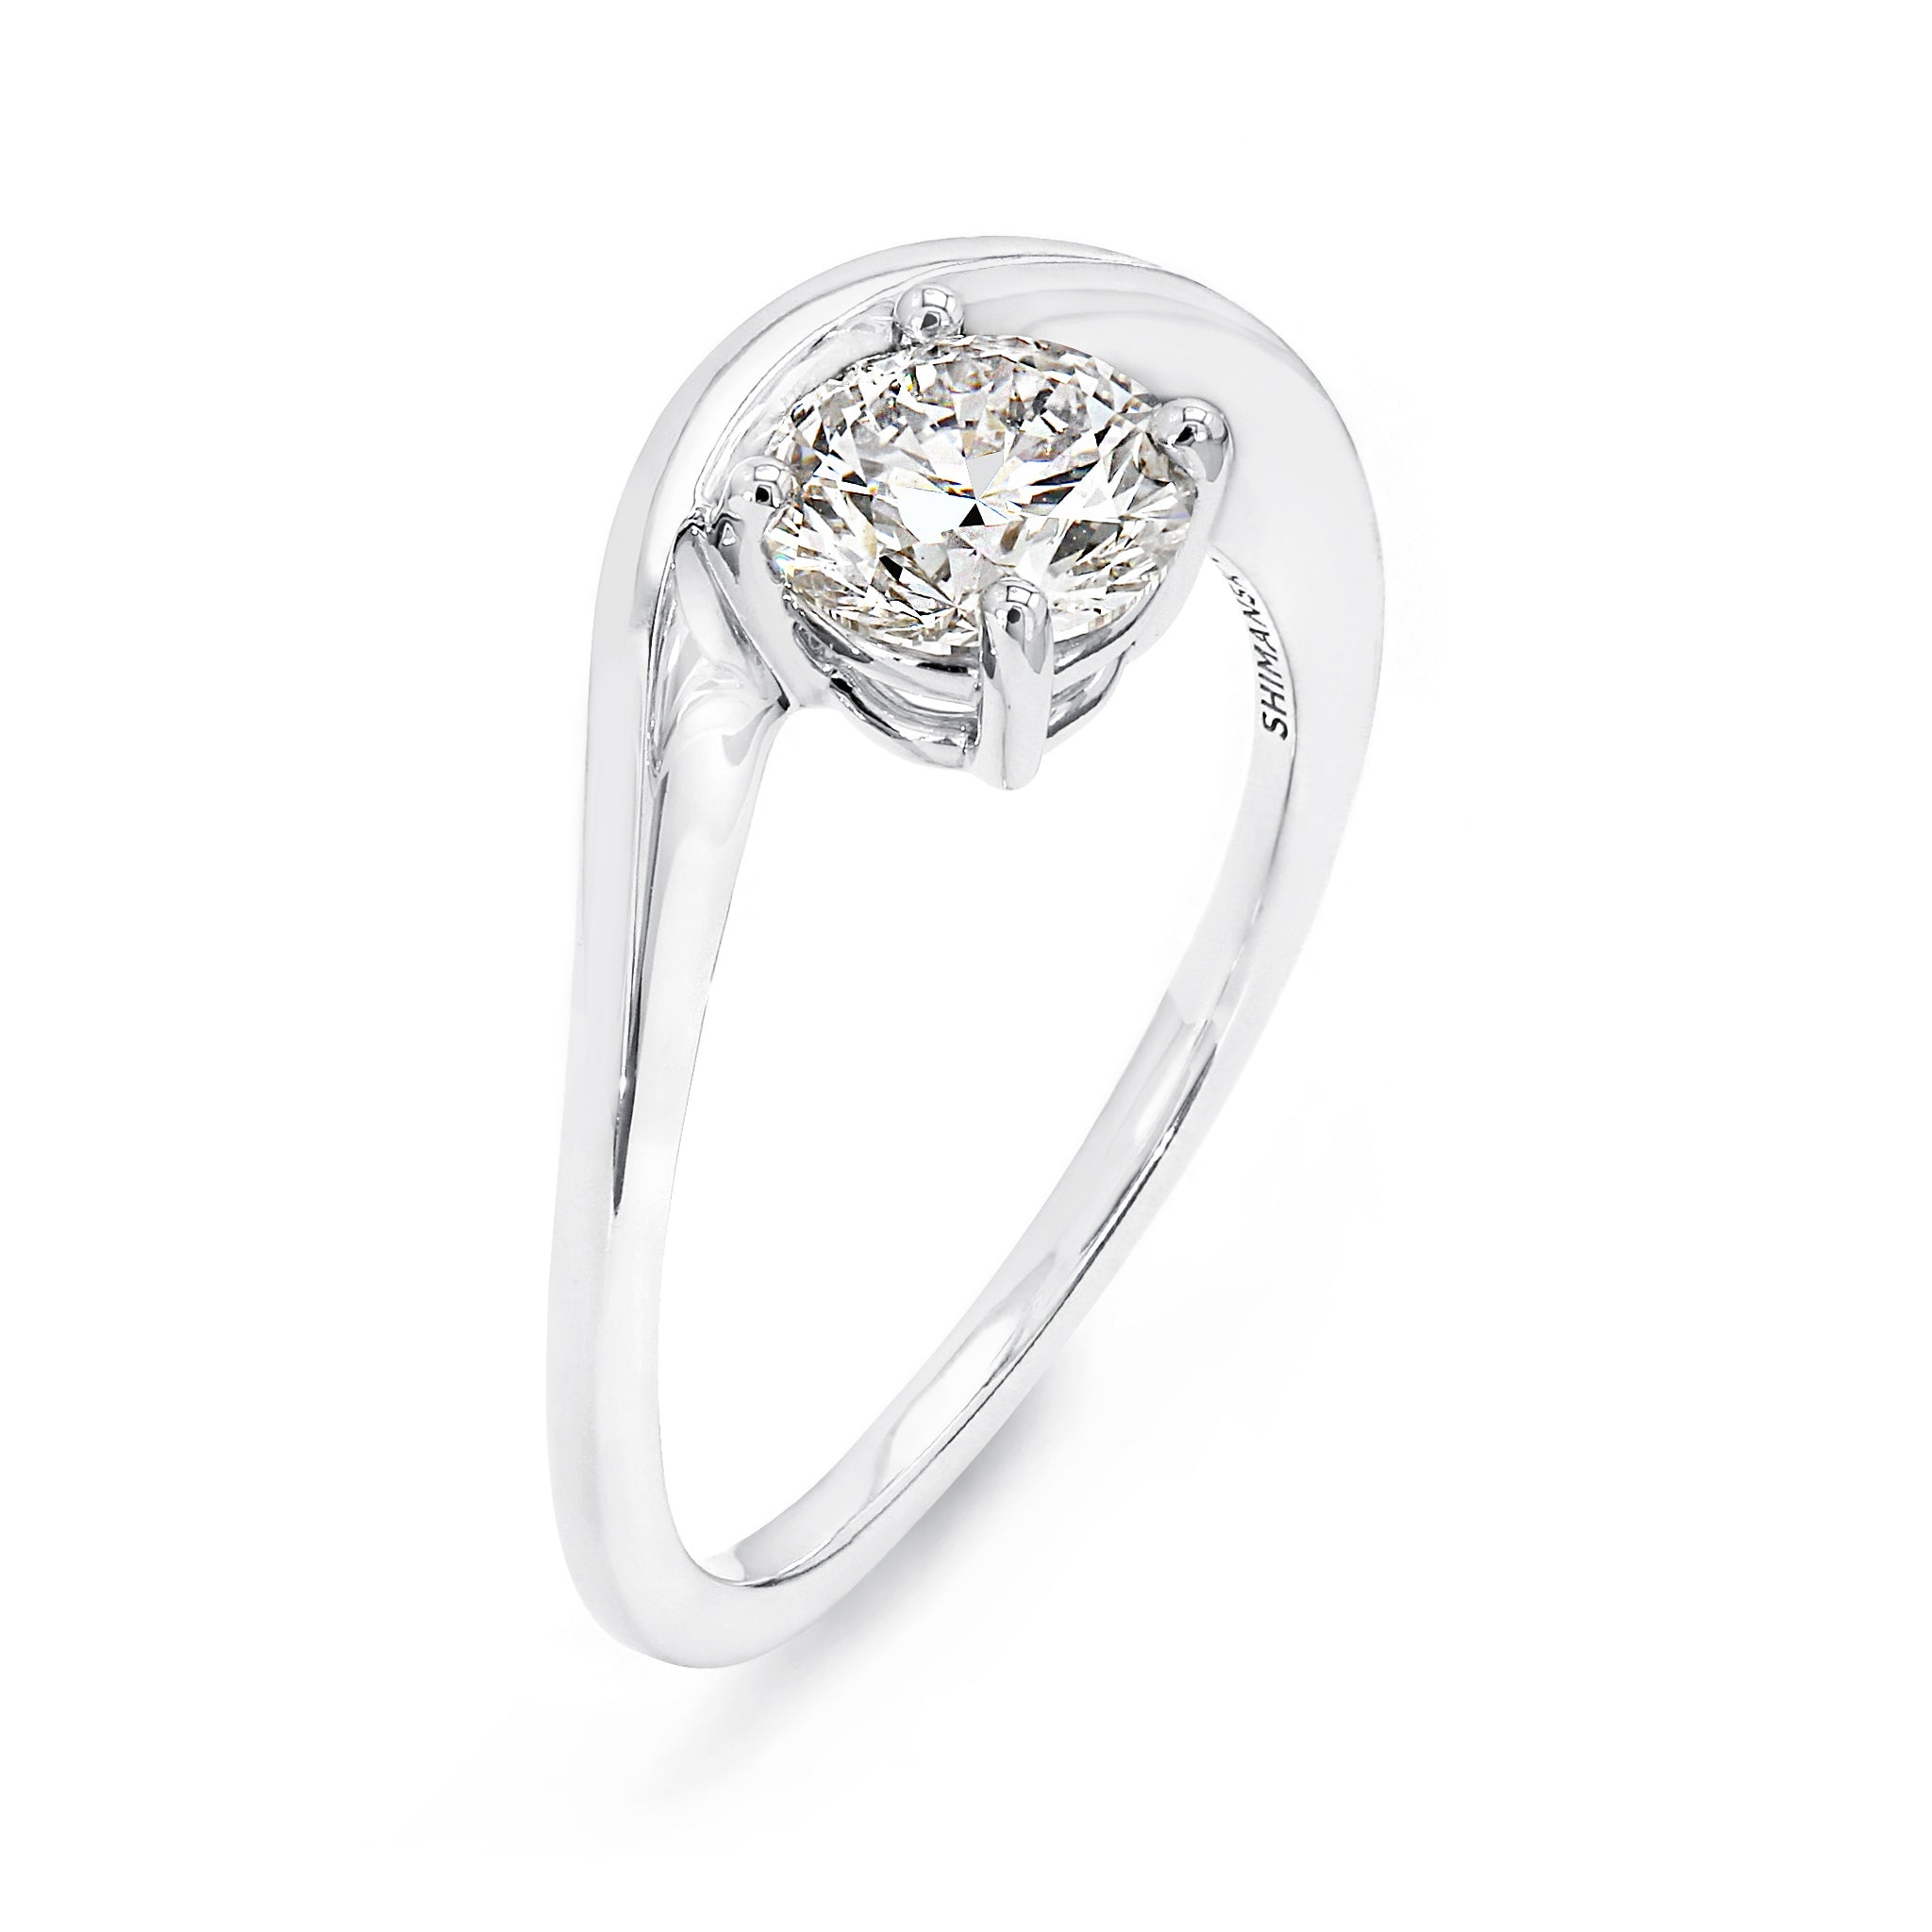 Shimansky - Silhouette Diamond Engagement Ring 1.00ct Crafted in 18K White Gold